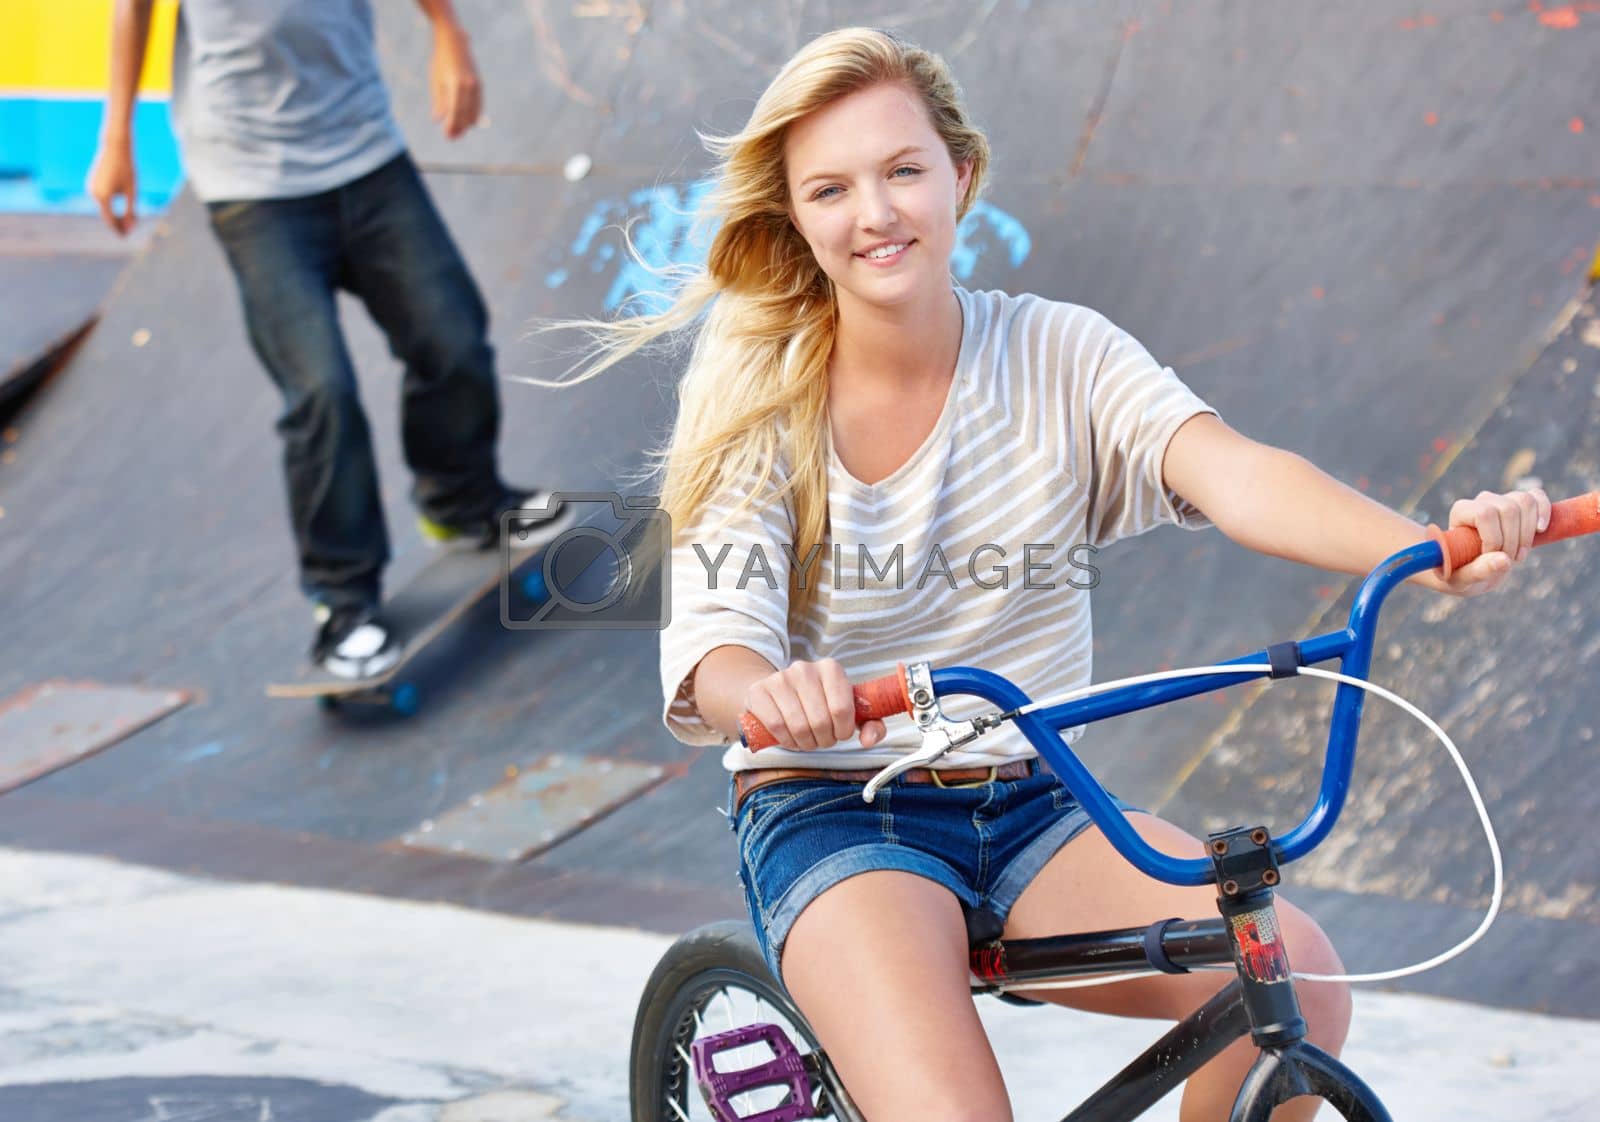 Royalty free image of Chilling at the skatepark. a teenage girl at a skatepark. by YuriArcurs